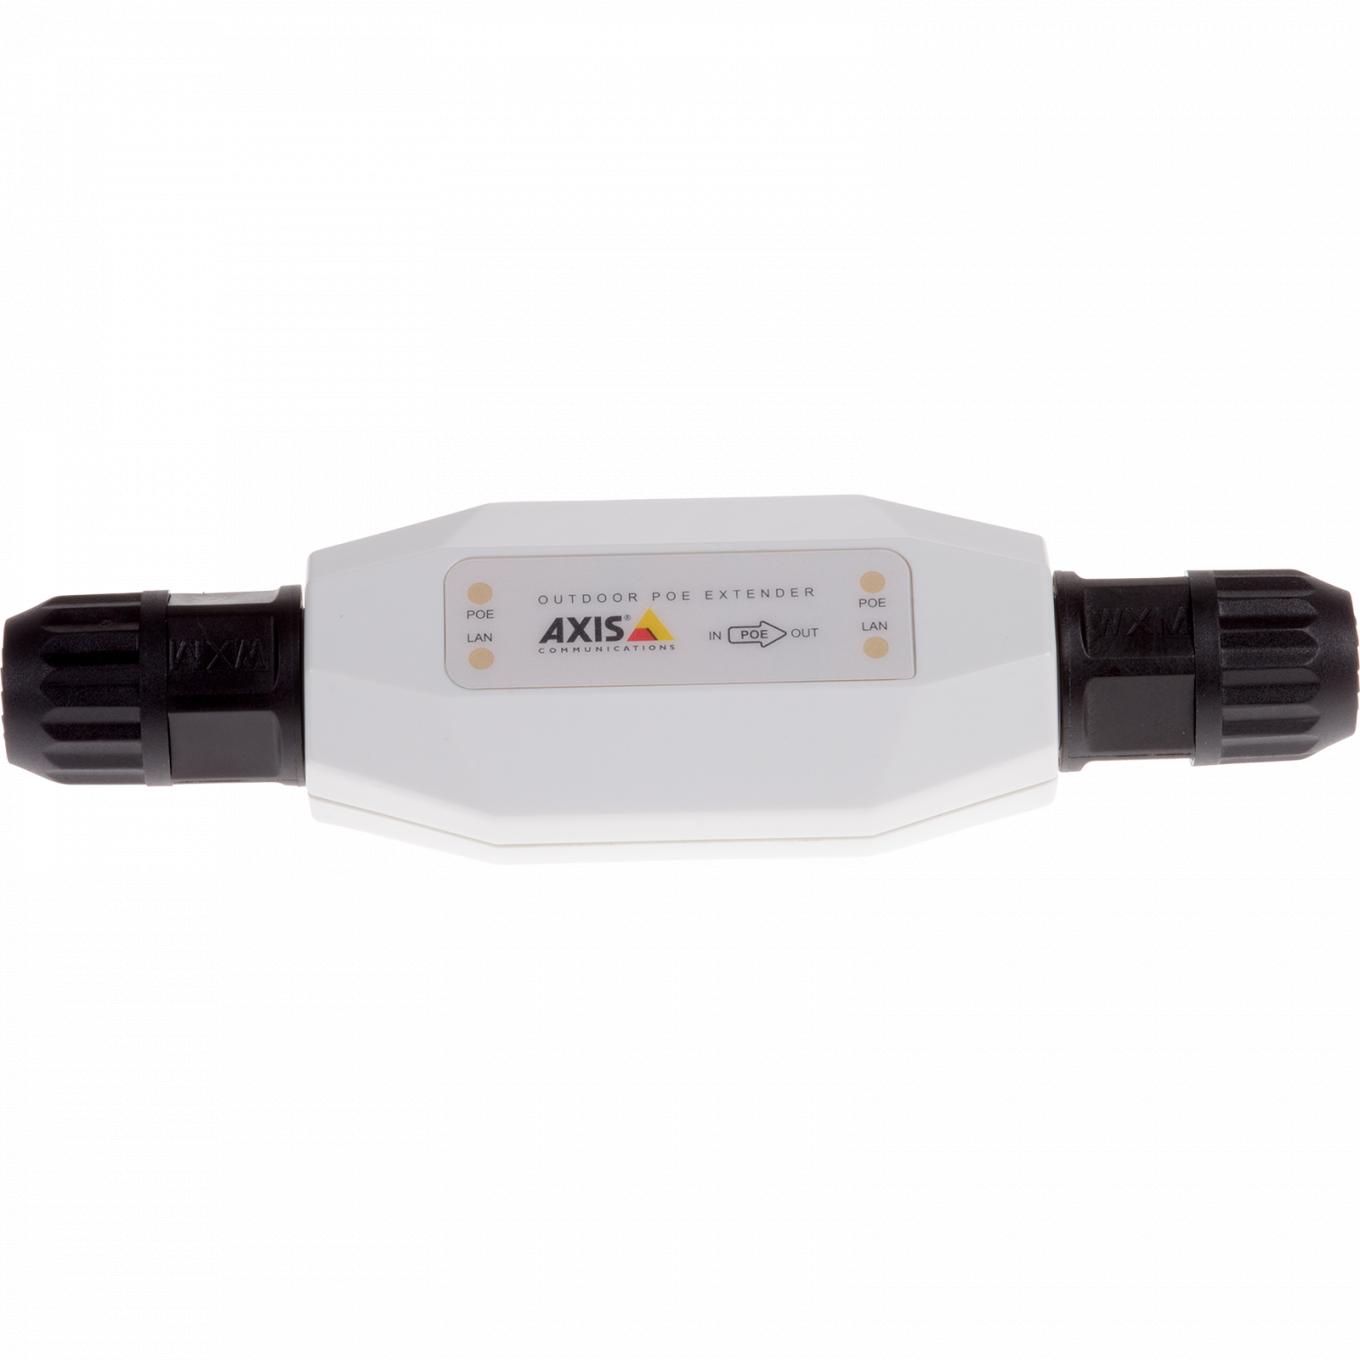 AXIS T8129-e outdoor Poe extender front